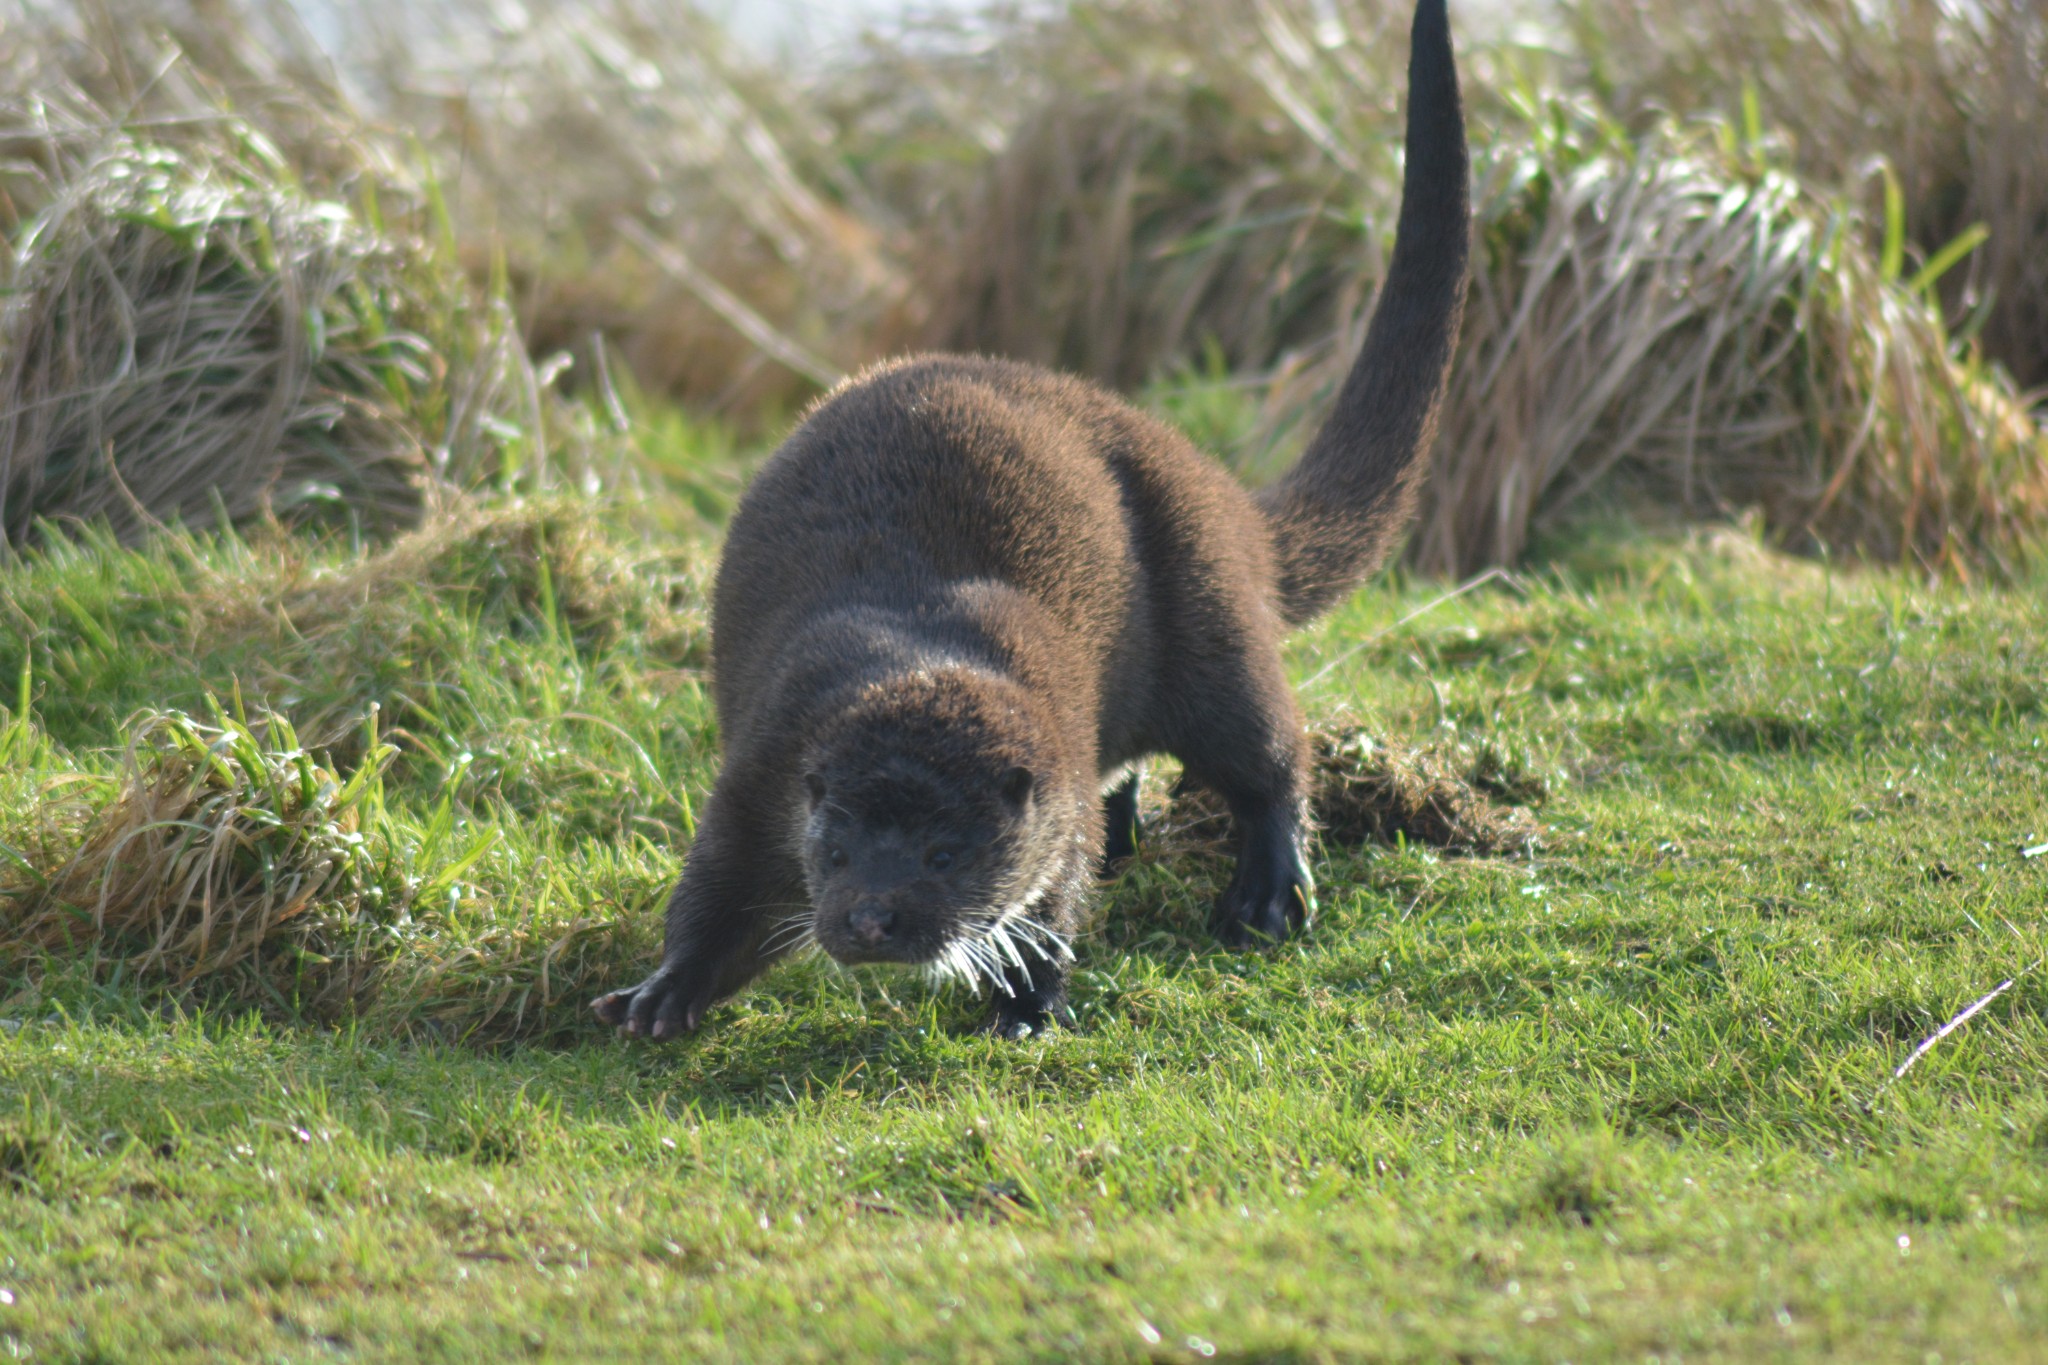 Otter in Orkney - image by Nick Card